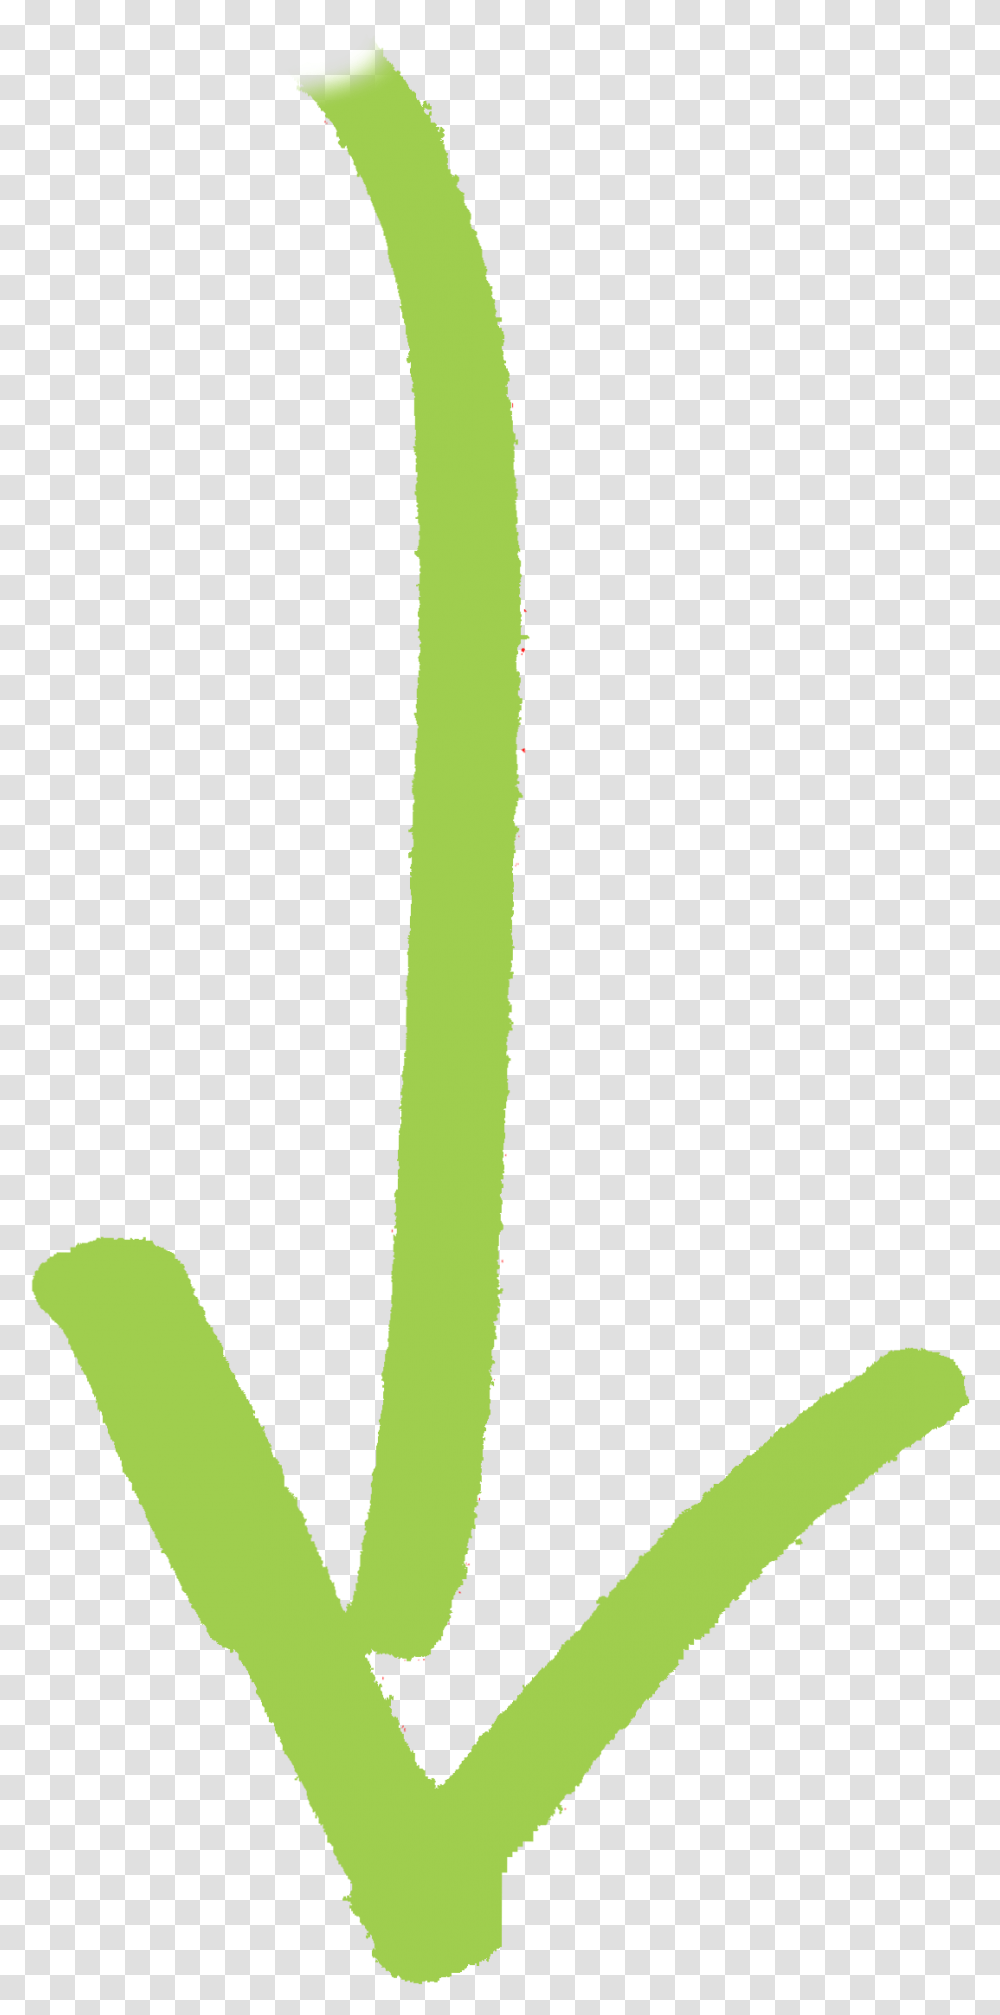 Curved Arrow Up Green Green Drawn Arrow Green Curved Arrow Drawn, Hook Transparent Png